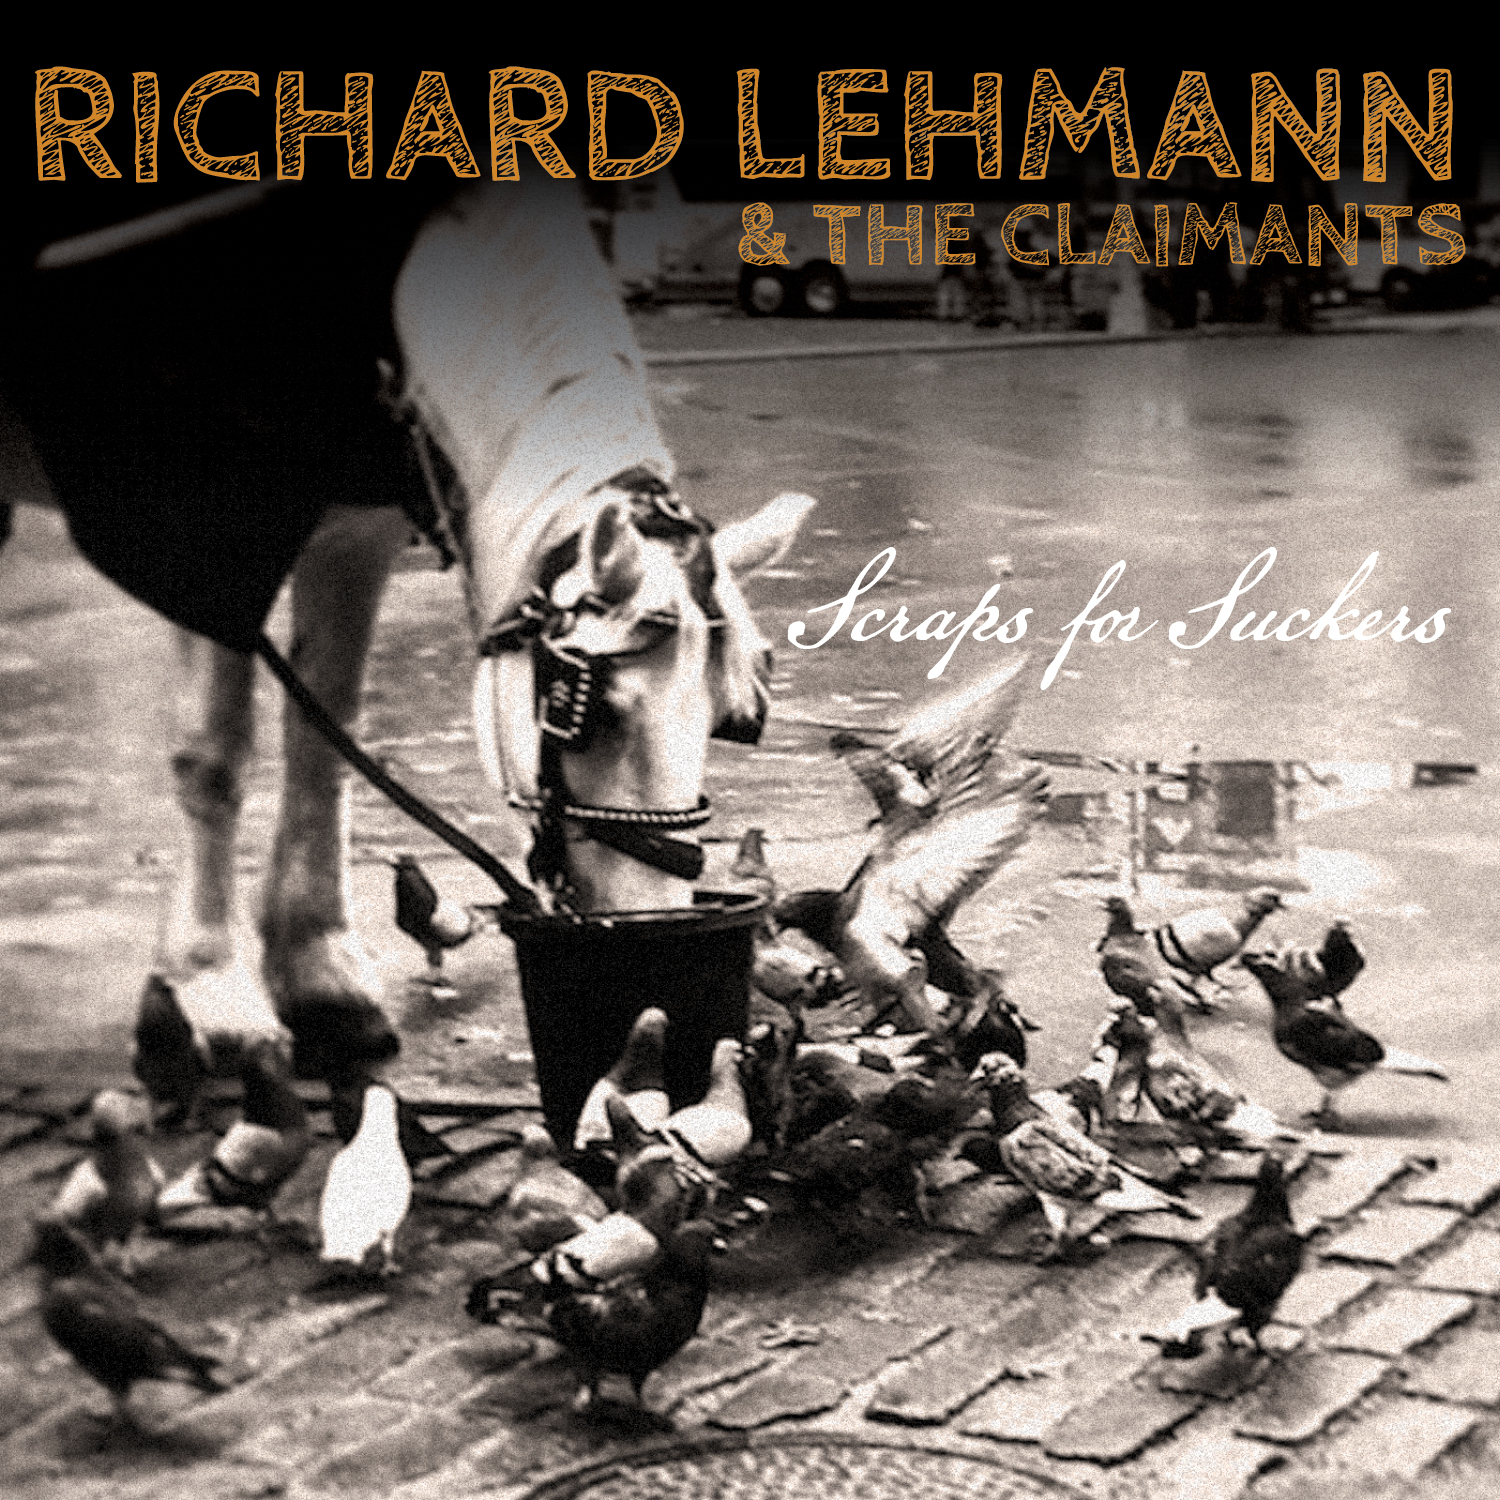 "Scraps for Suckers" - The debut album by Richard Lehmann and The Claimants